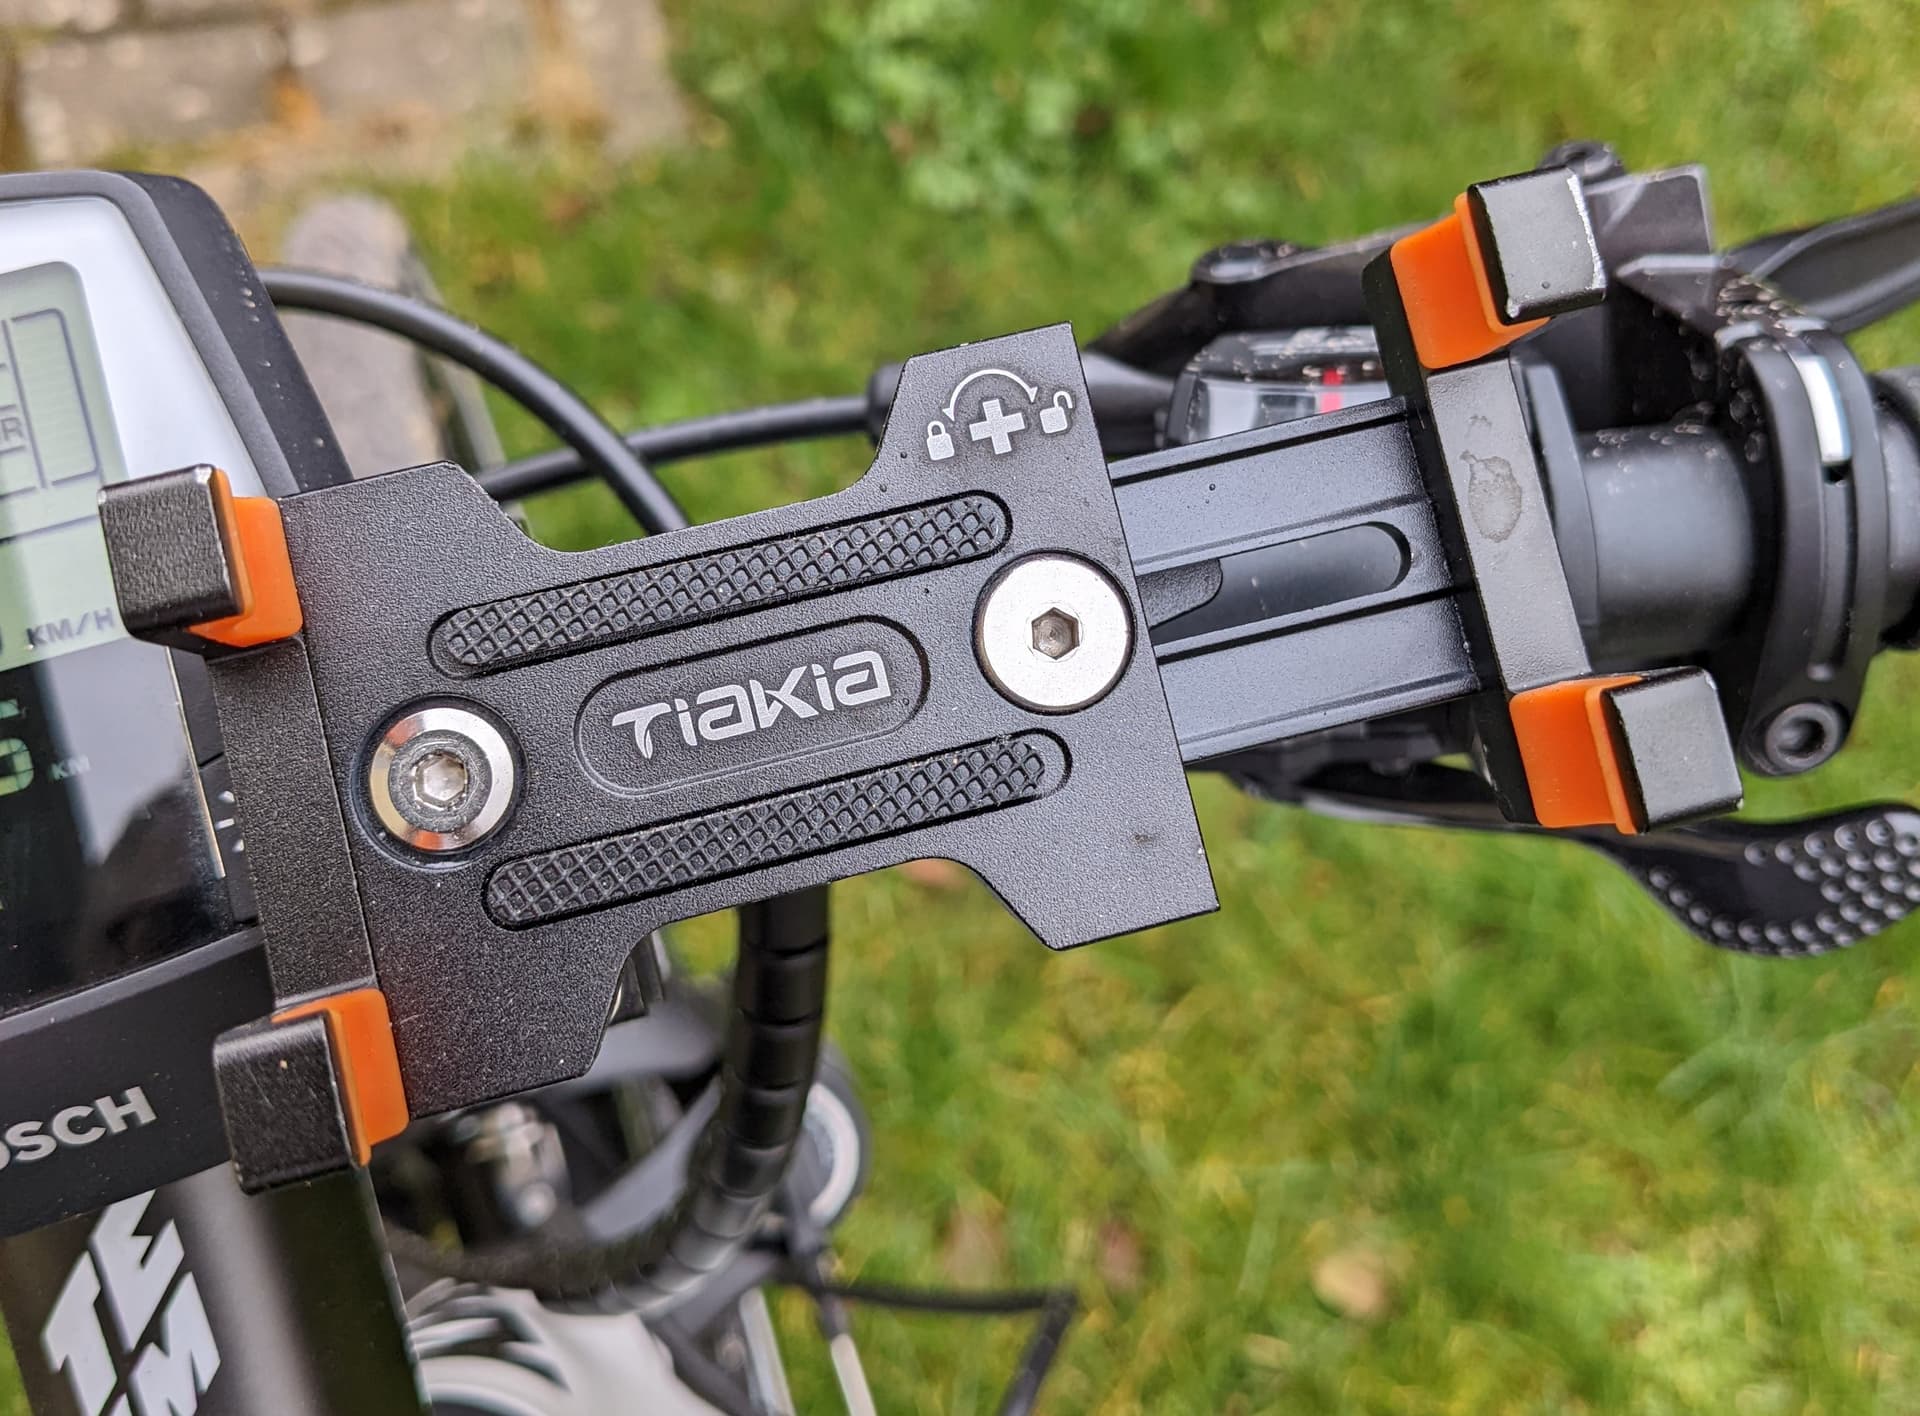 Removable bike mount for FP4 - The Products - Fairphone Community